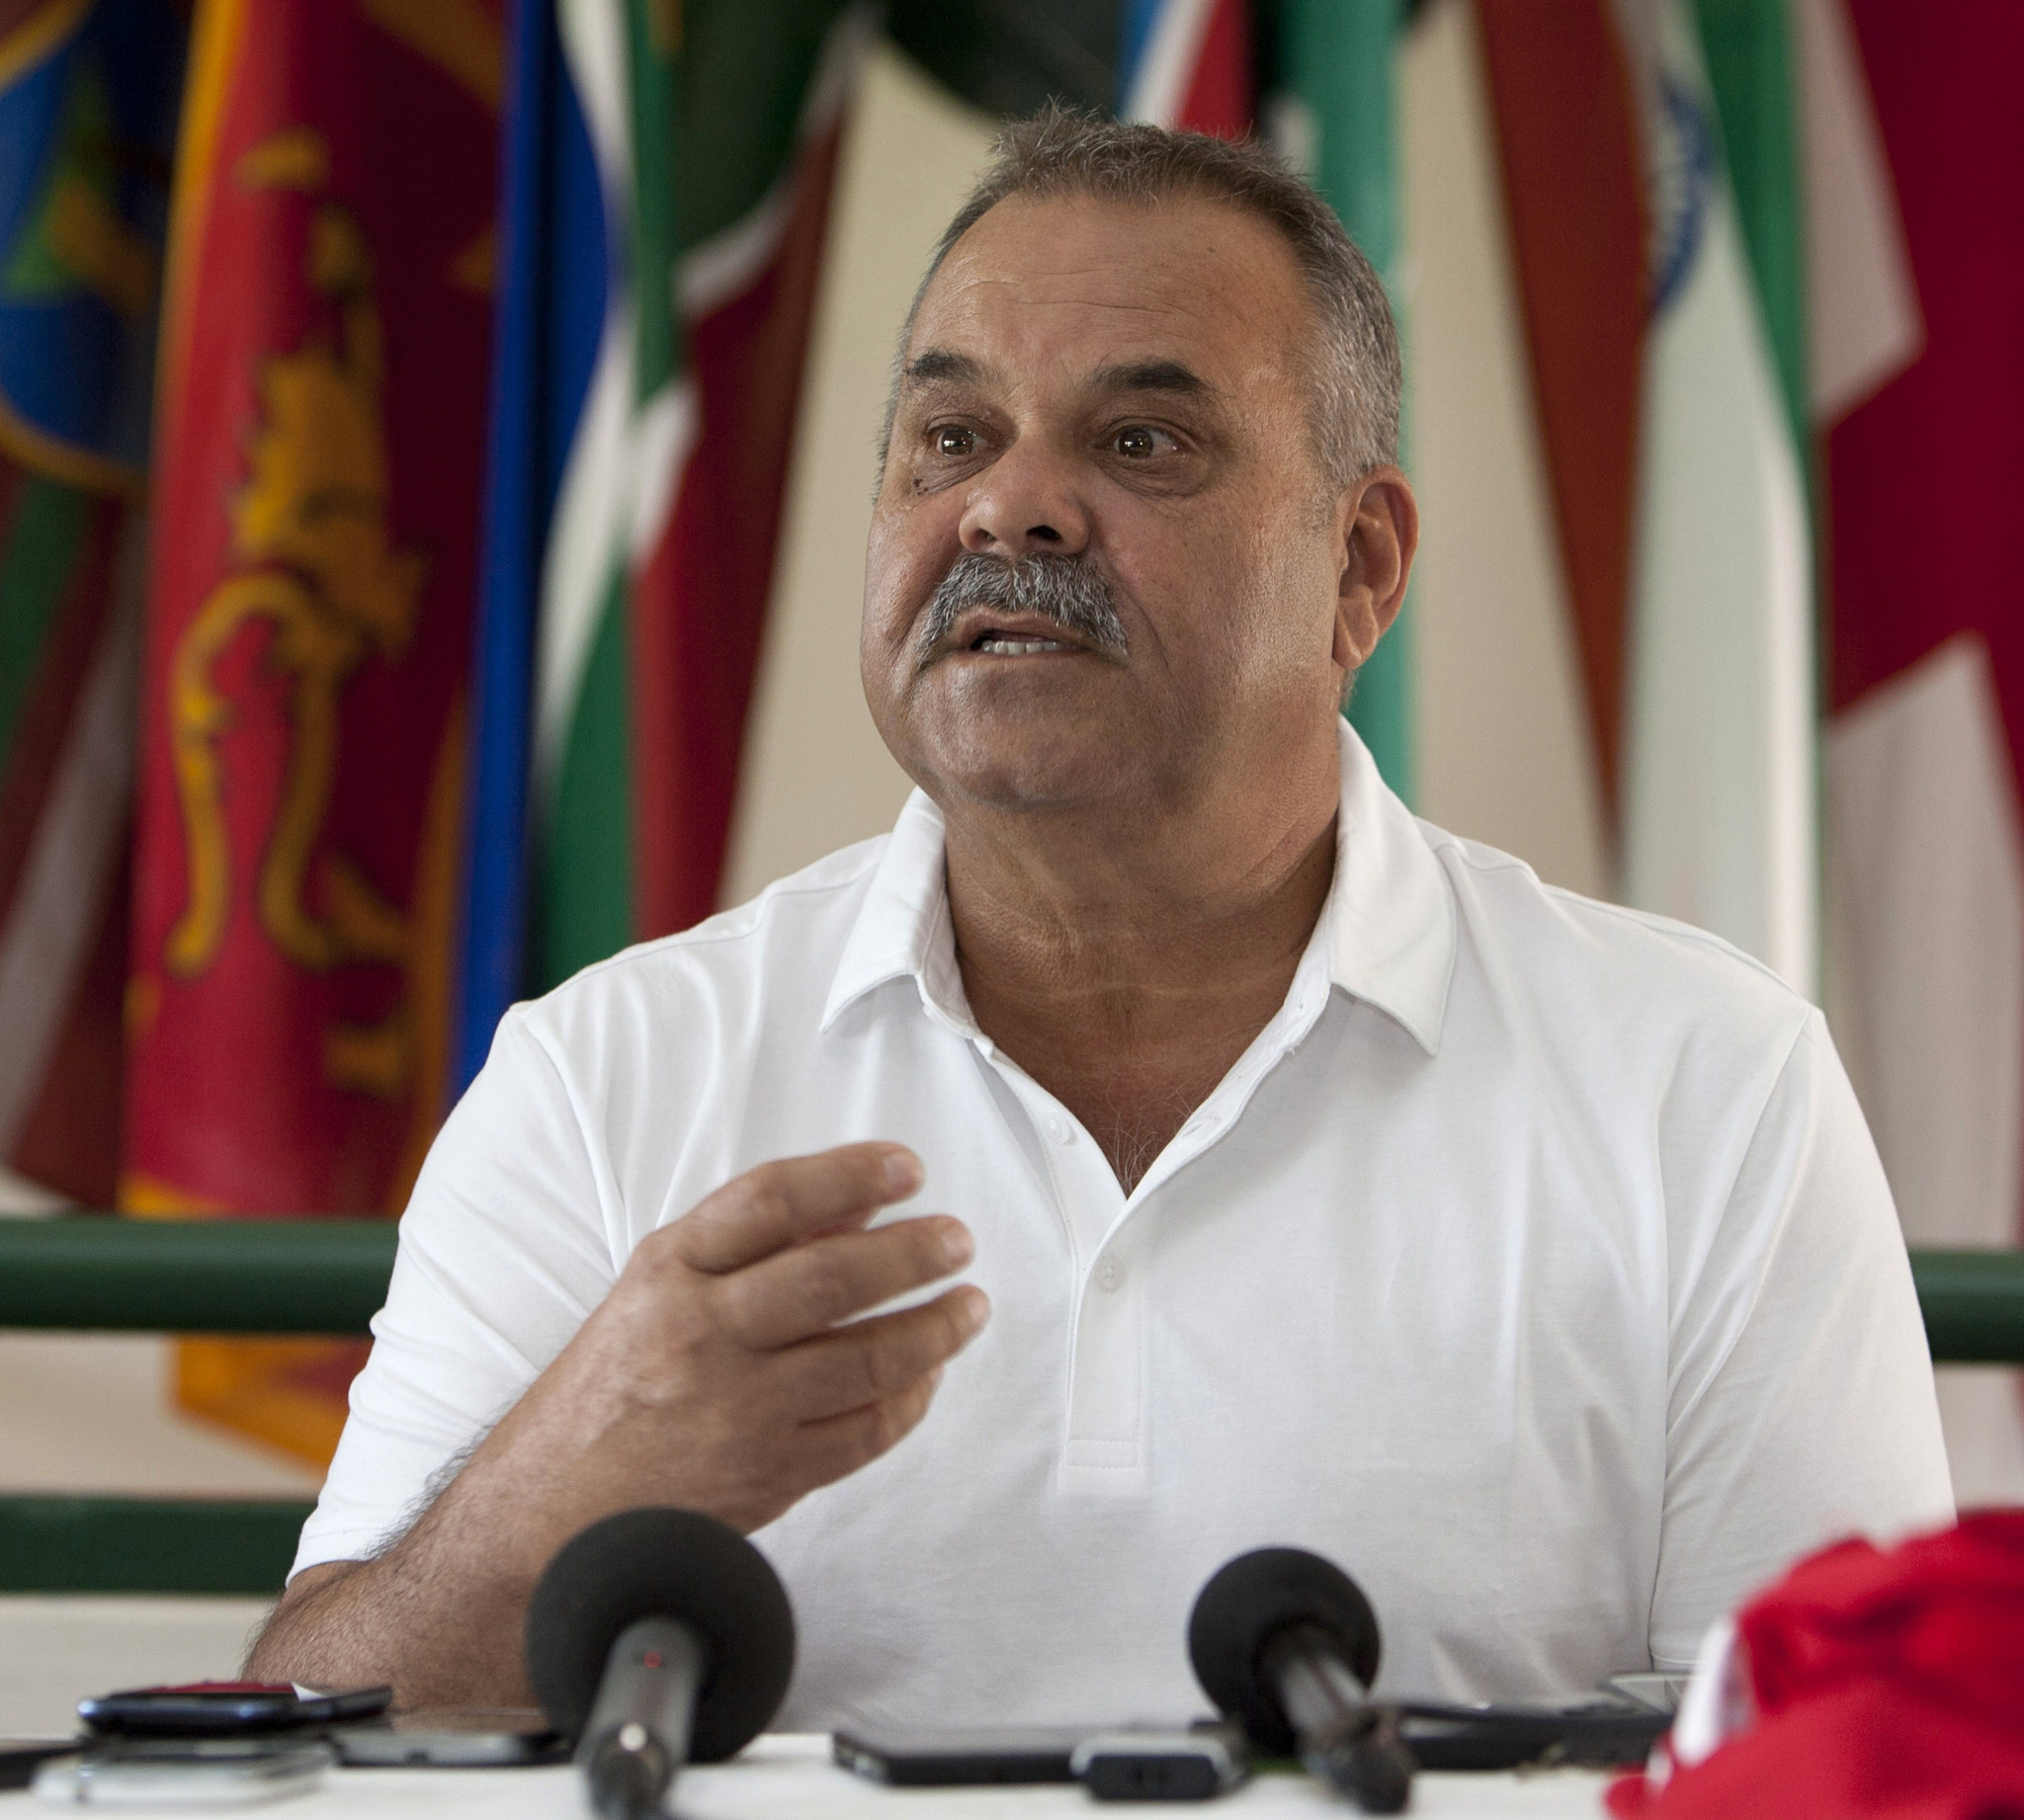 World Cup winning coach Whatmore appointed to lead Nepal men's team 